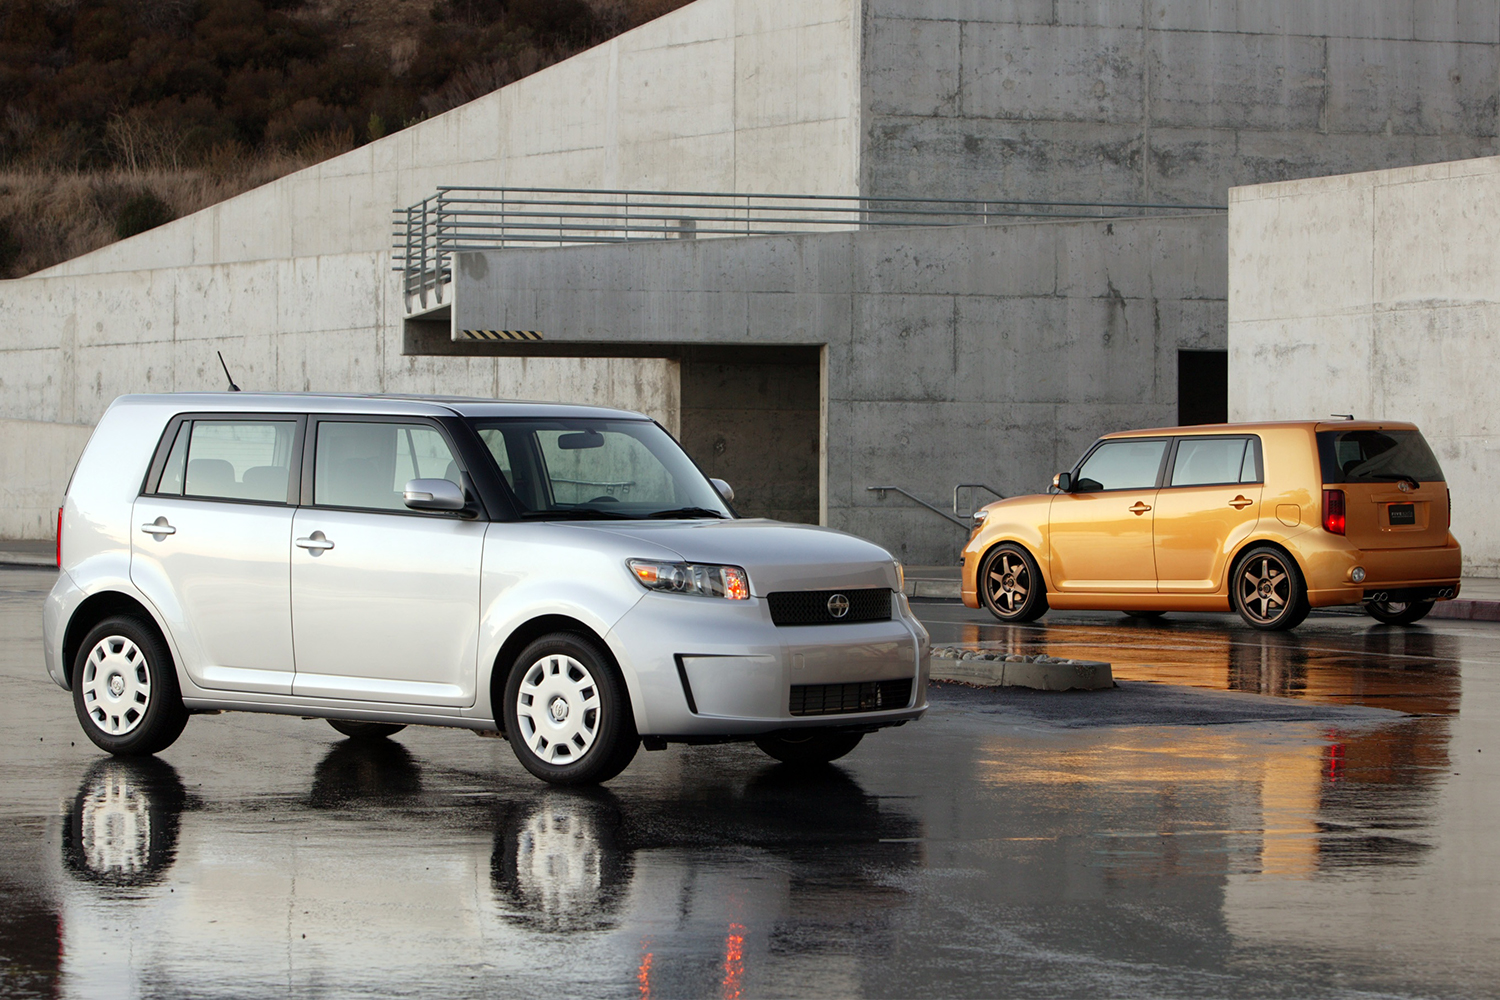 Two 2007 Scion xB hatchbacks in grey and gold